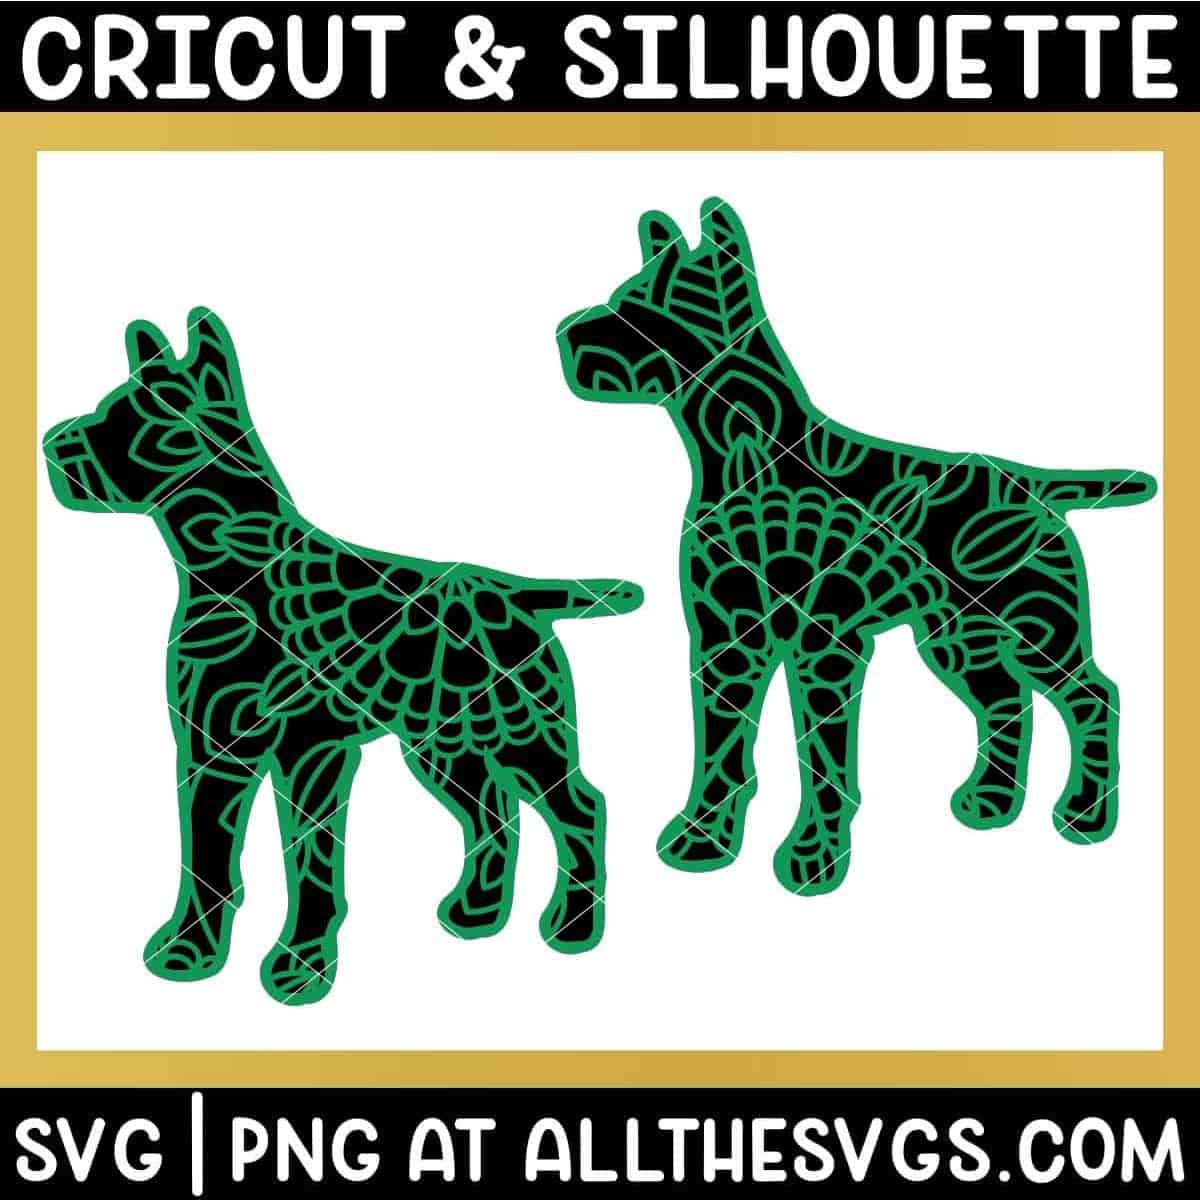 2 versions of doberman dog svg file mandala center from front legs and back.